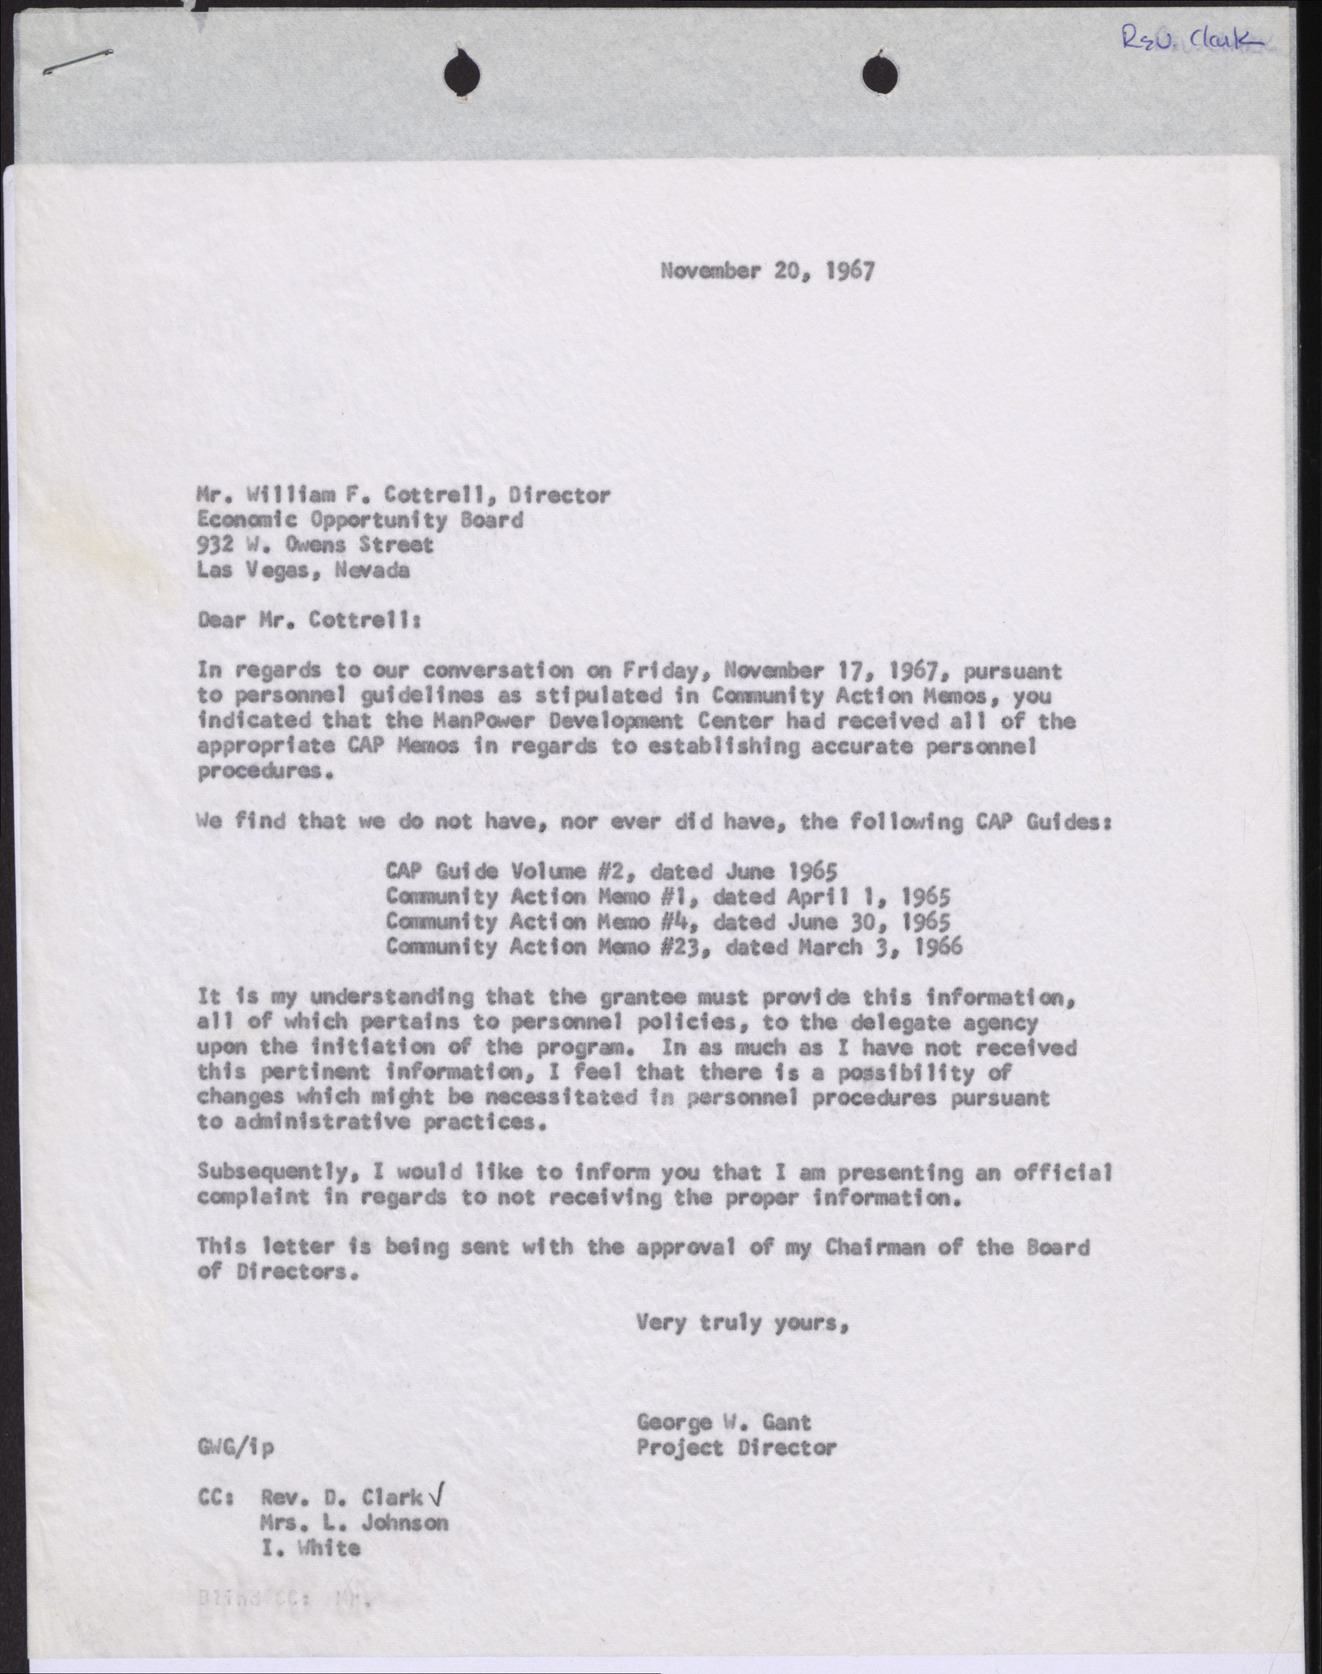 Letter to Mr. William F. Cottrell from George W. Gant, November 20, 1967